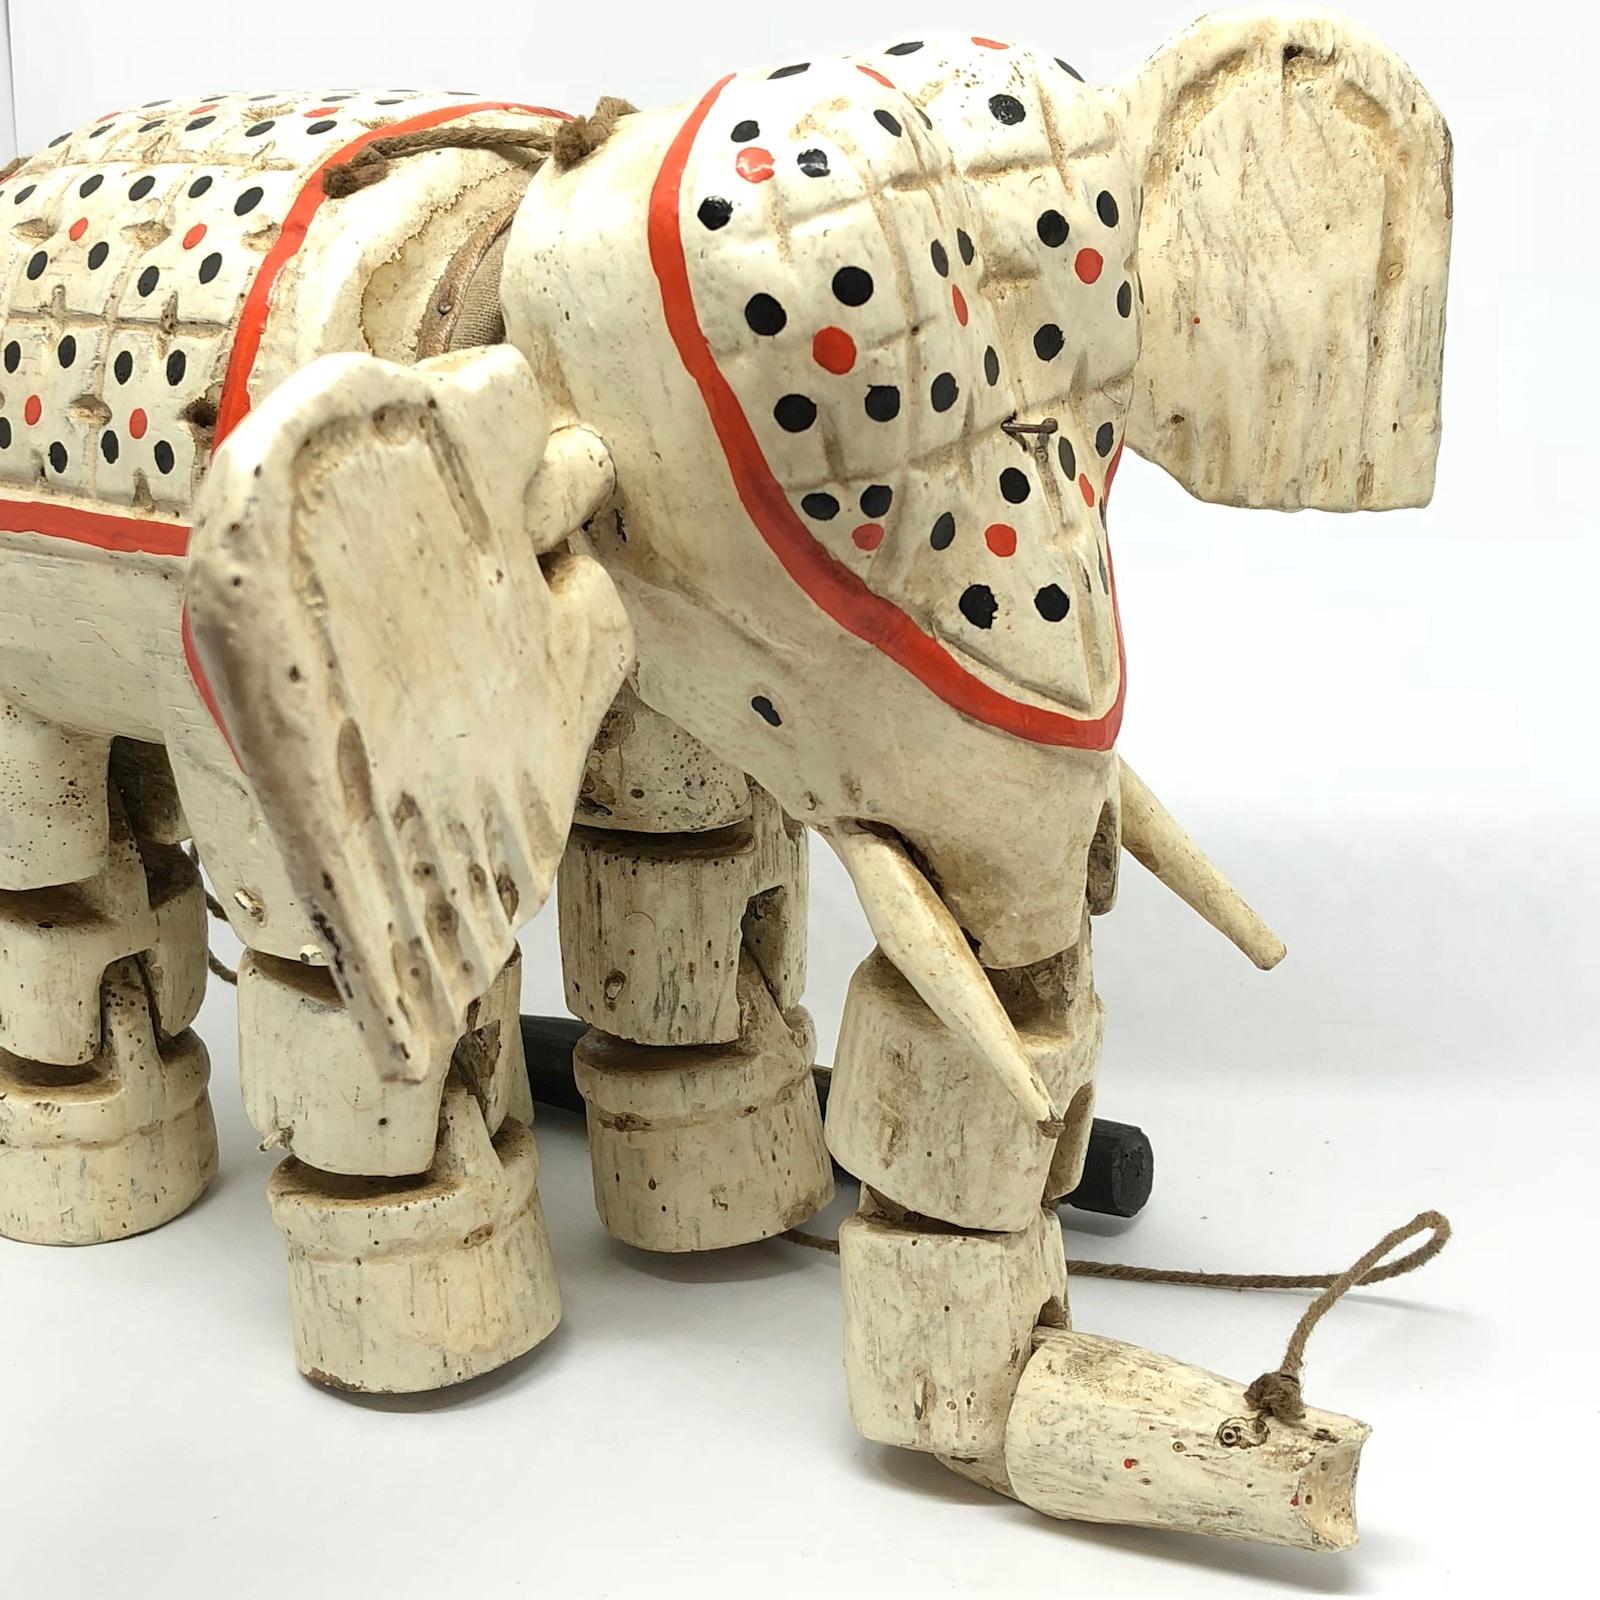 Folk Art Handcrafted Vintage Marionette Puppet on a String Elephant, India, 1930s